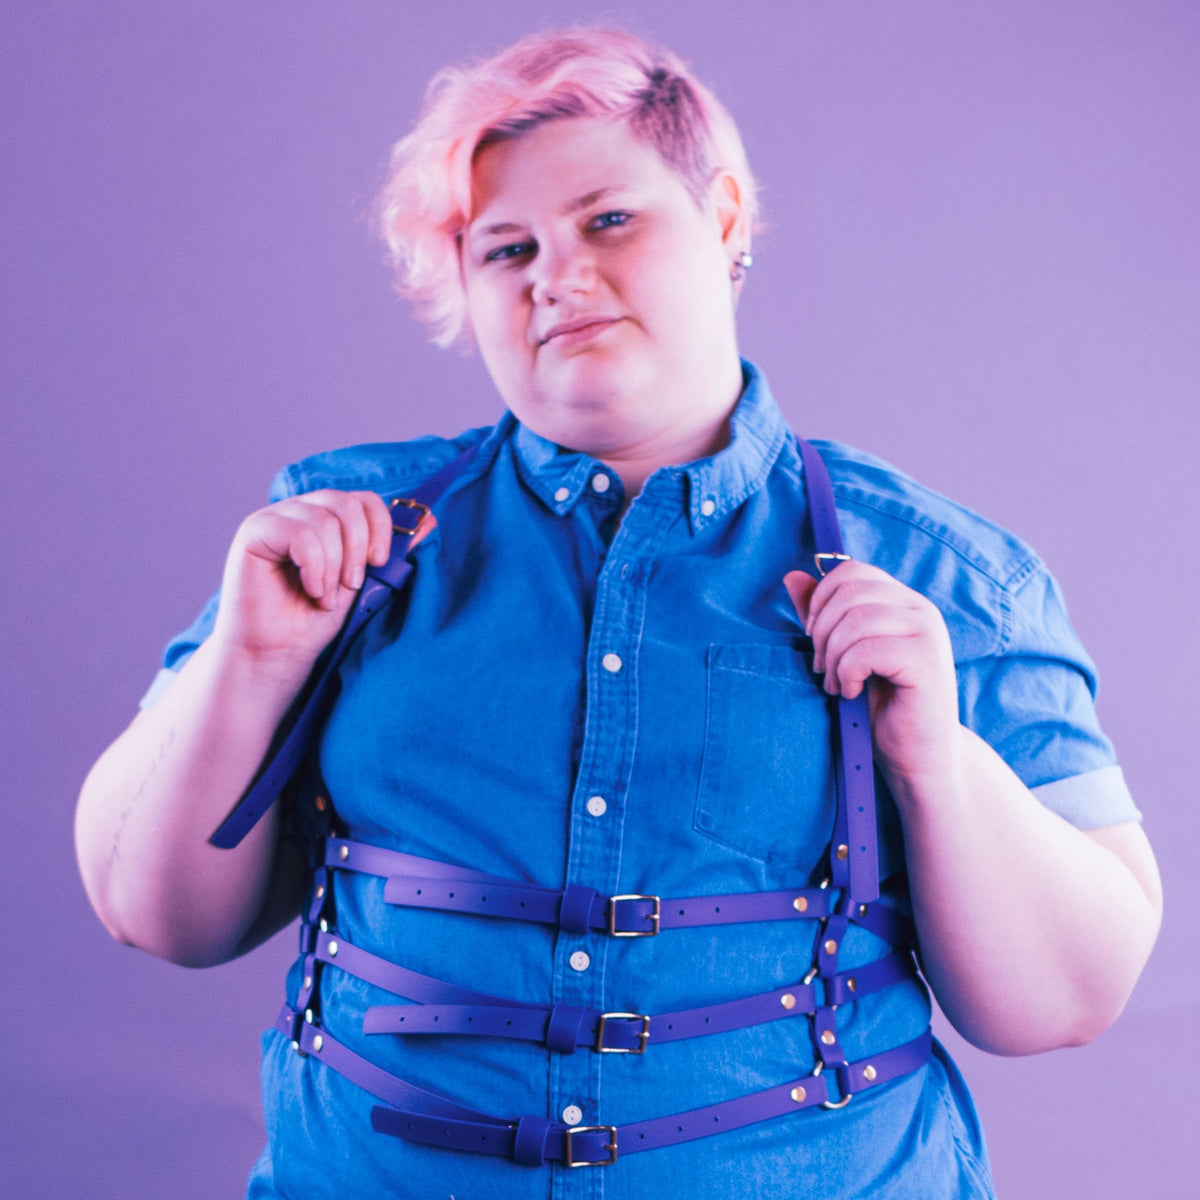 Woman wearing a purple suspender style harness over a denim shirt.